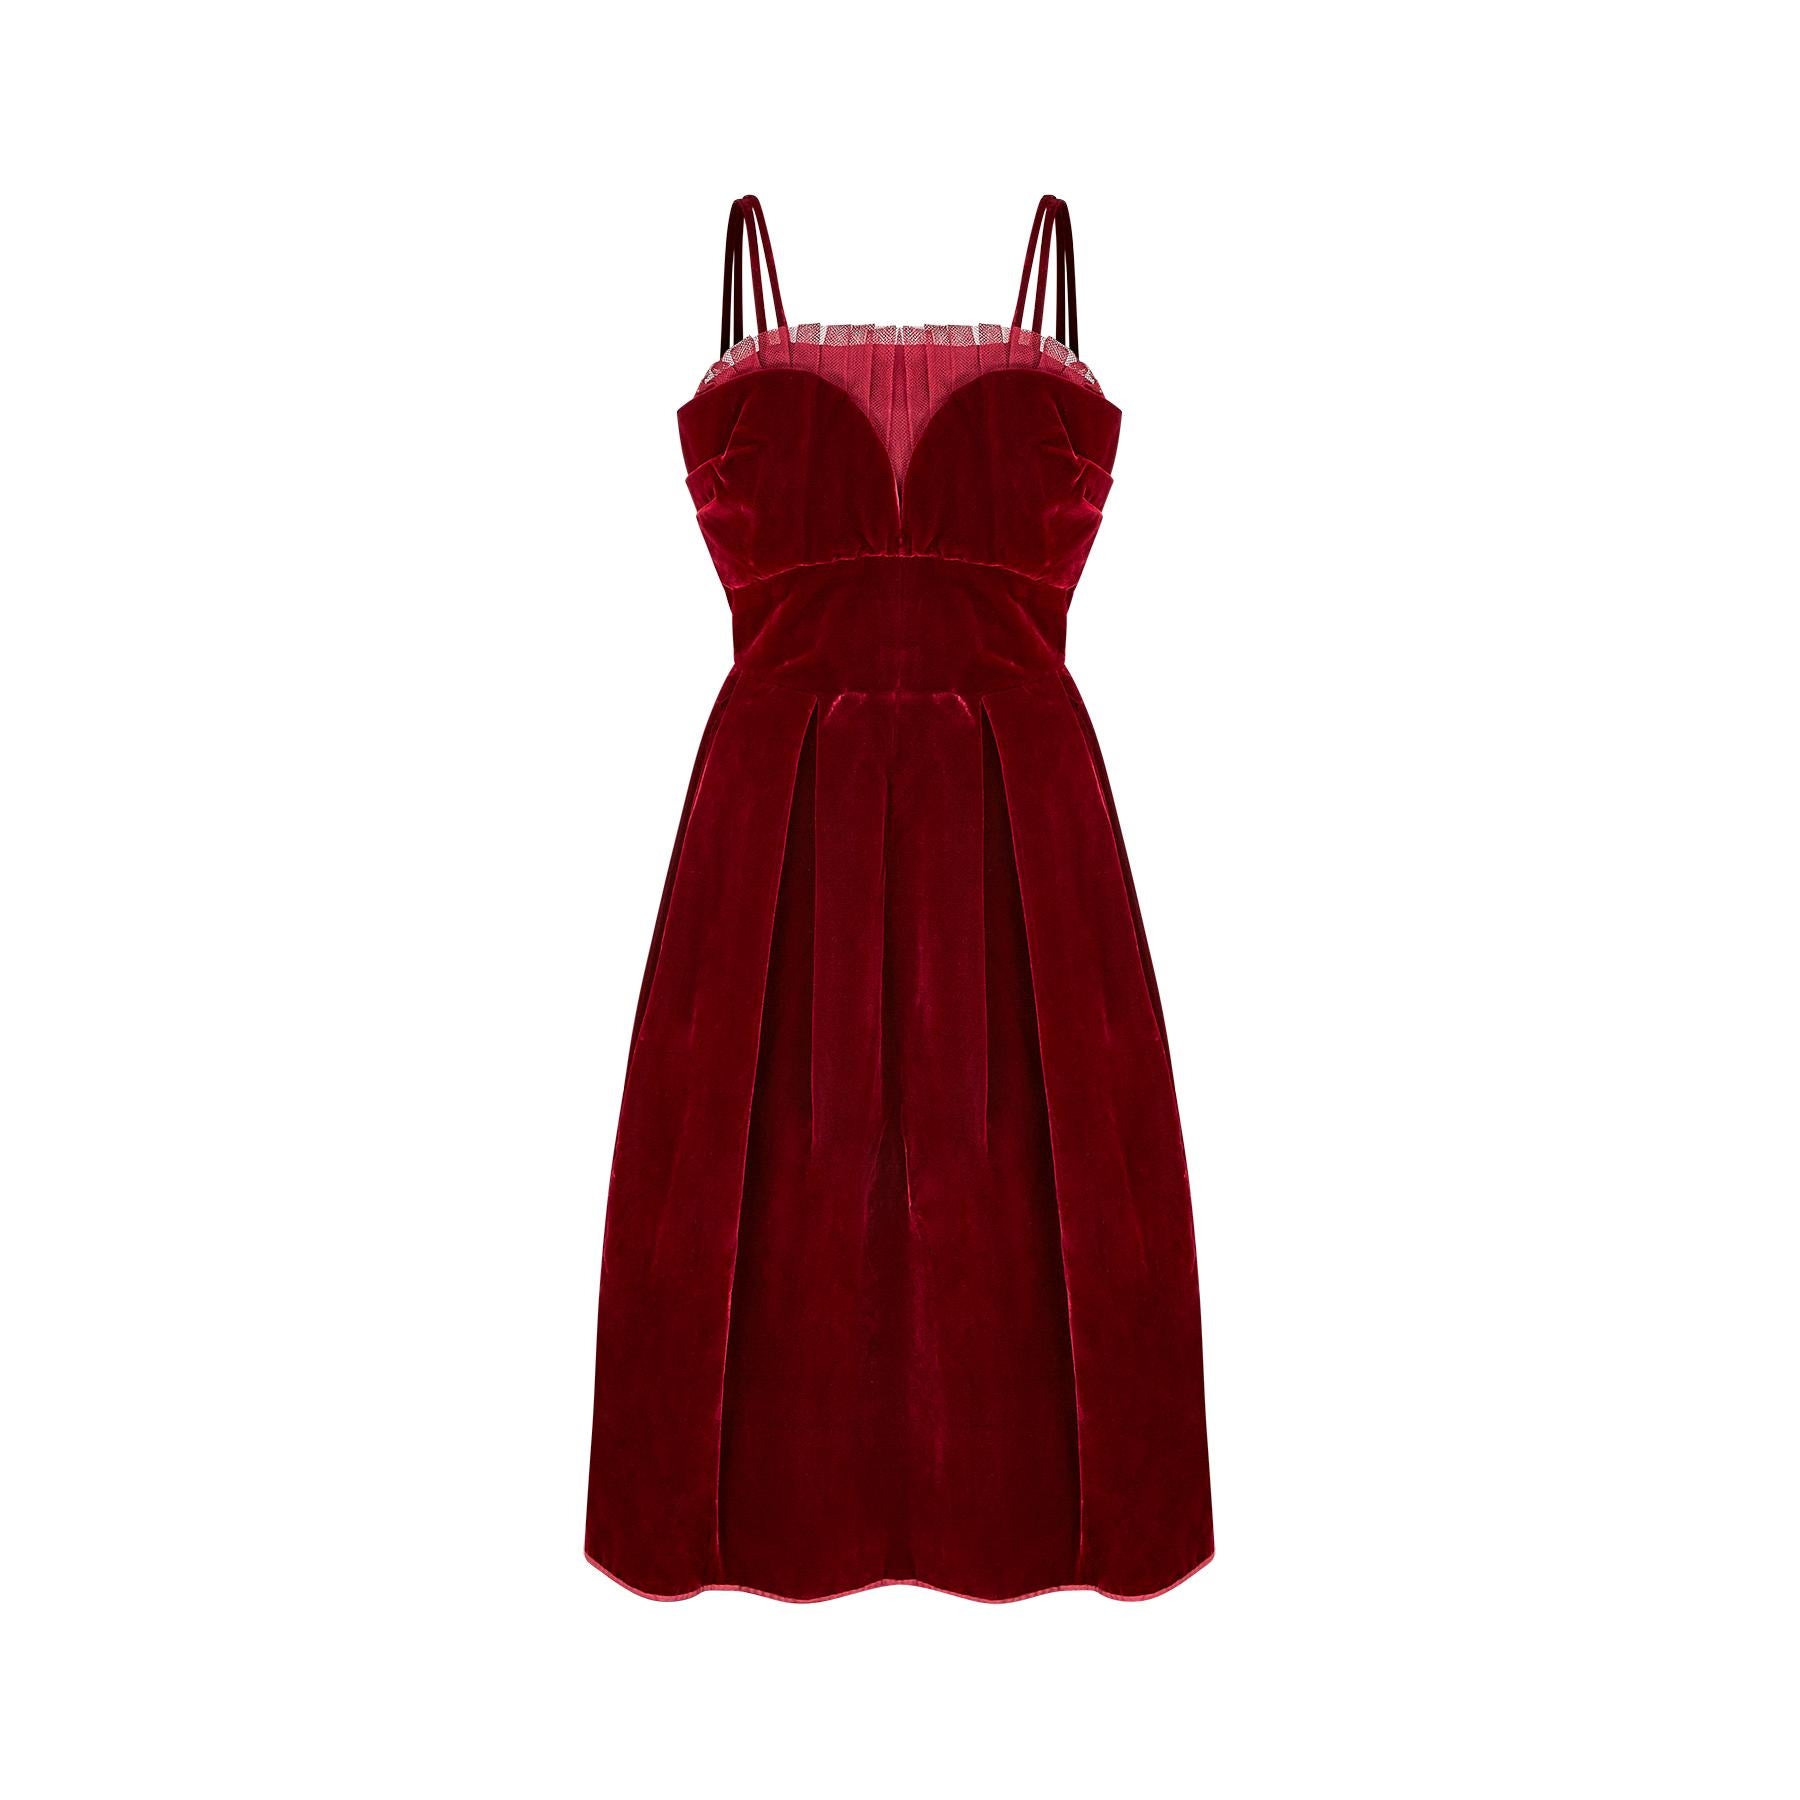 Original 1950s velvet burgundy red cocktail dress with balconette bustline. This is a such a feminine and gamine example of evening wear from the period. The striking feature is the sheer opulence and luxury of its colour; a rich, deep red in the